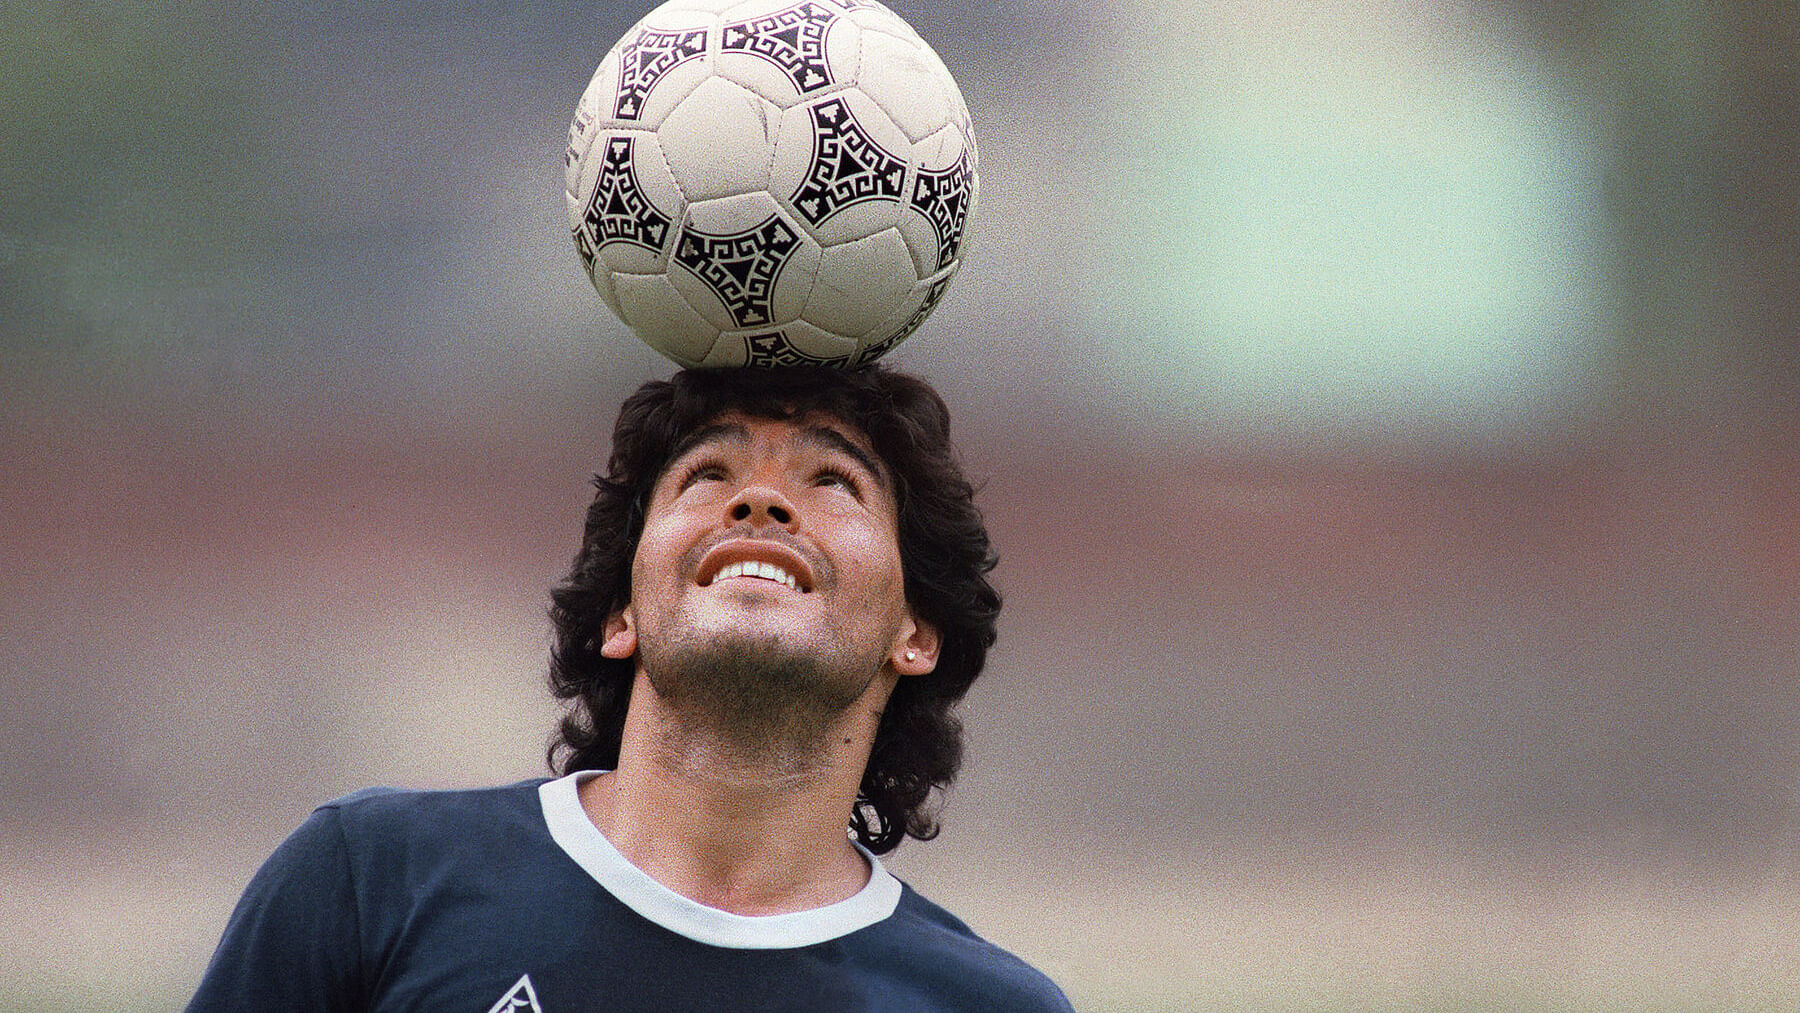 Diego Maradona passed away at the age of 60.